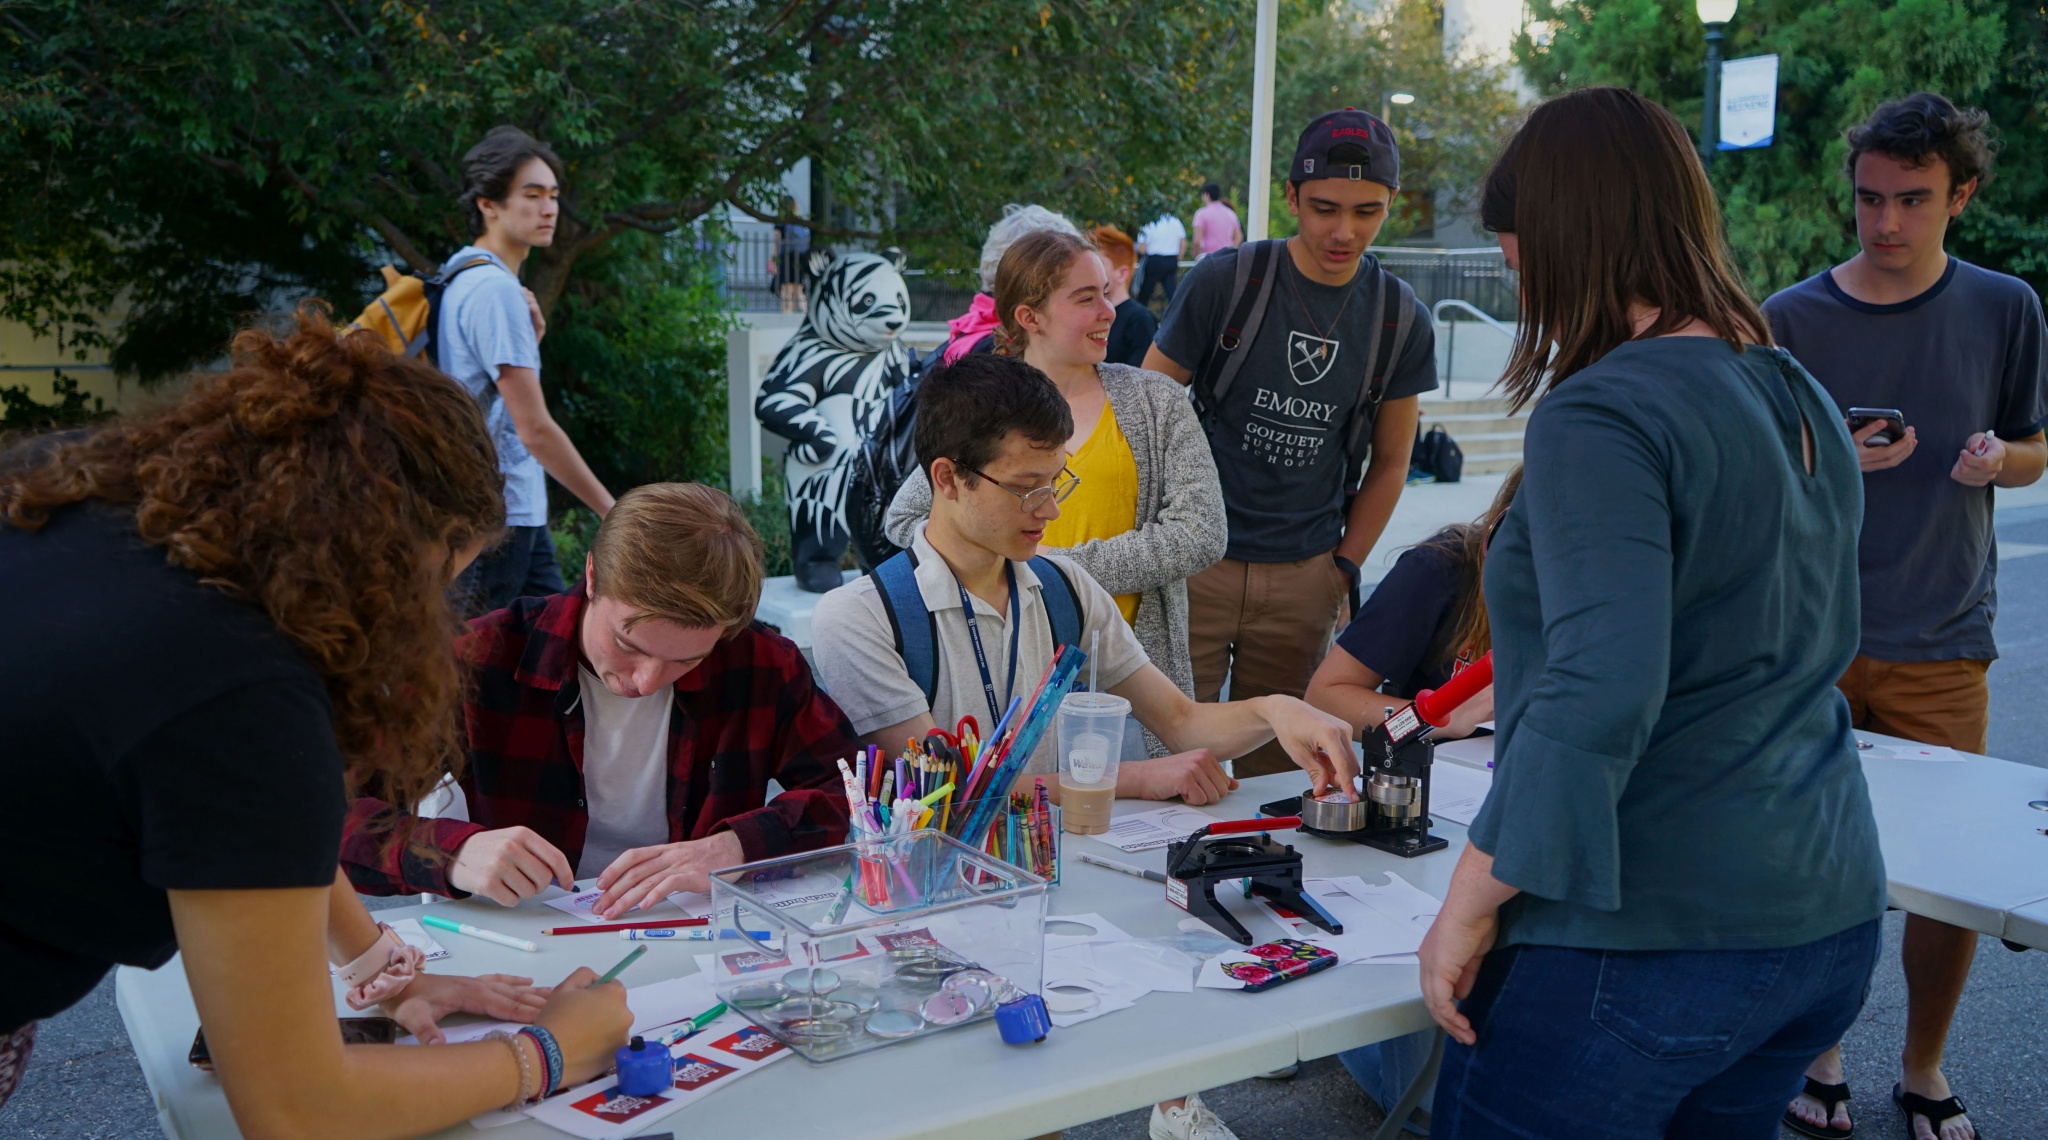 Jenna Goff assists a crowd of people in creating buttons about what activism means to them.